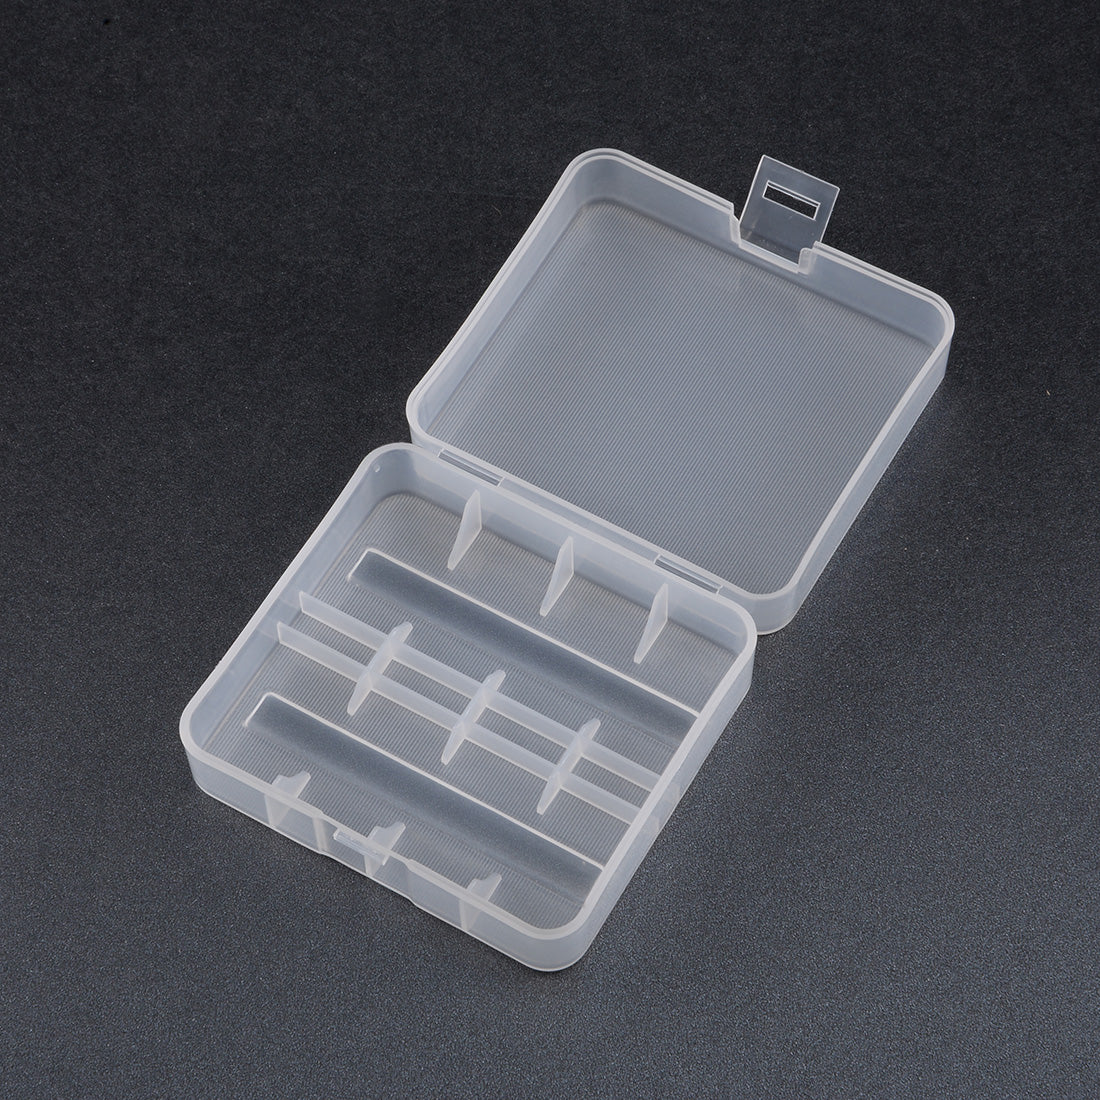 uxcell Uxcell Transparent Plastic Battery Organizer Case Holder Storage Box Container for 26650 Battery